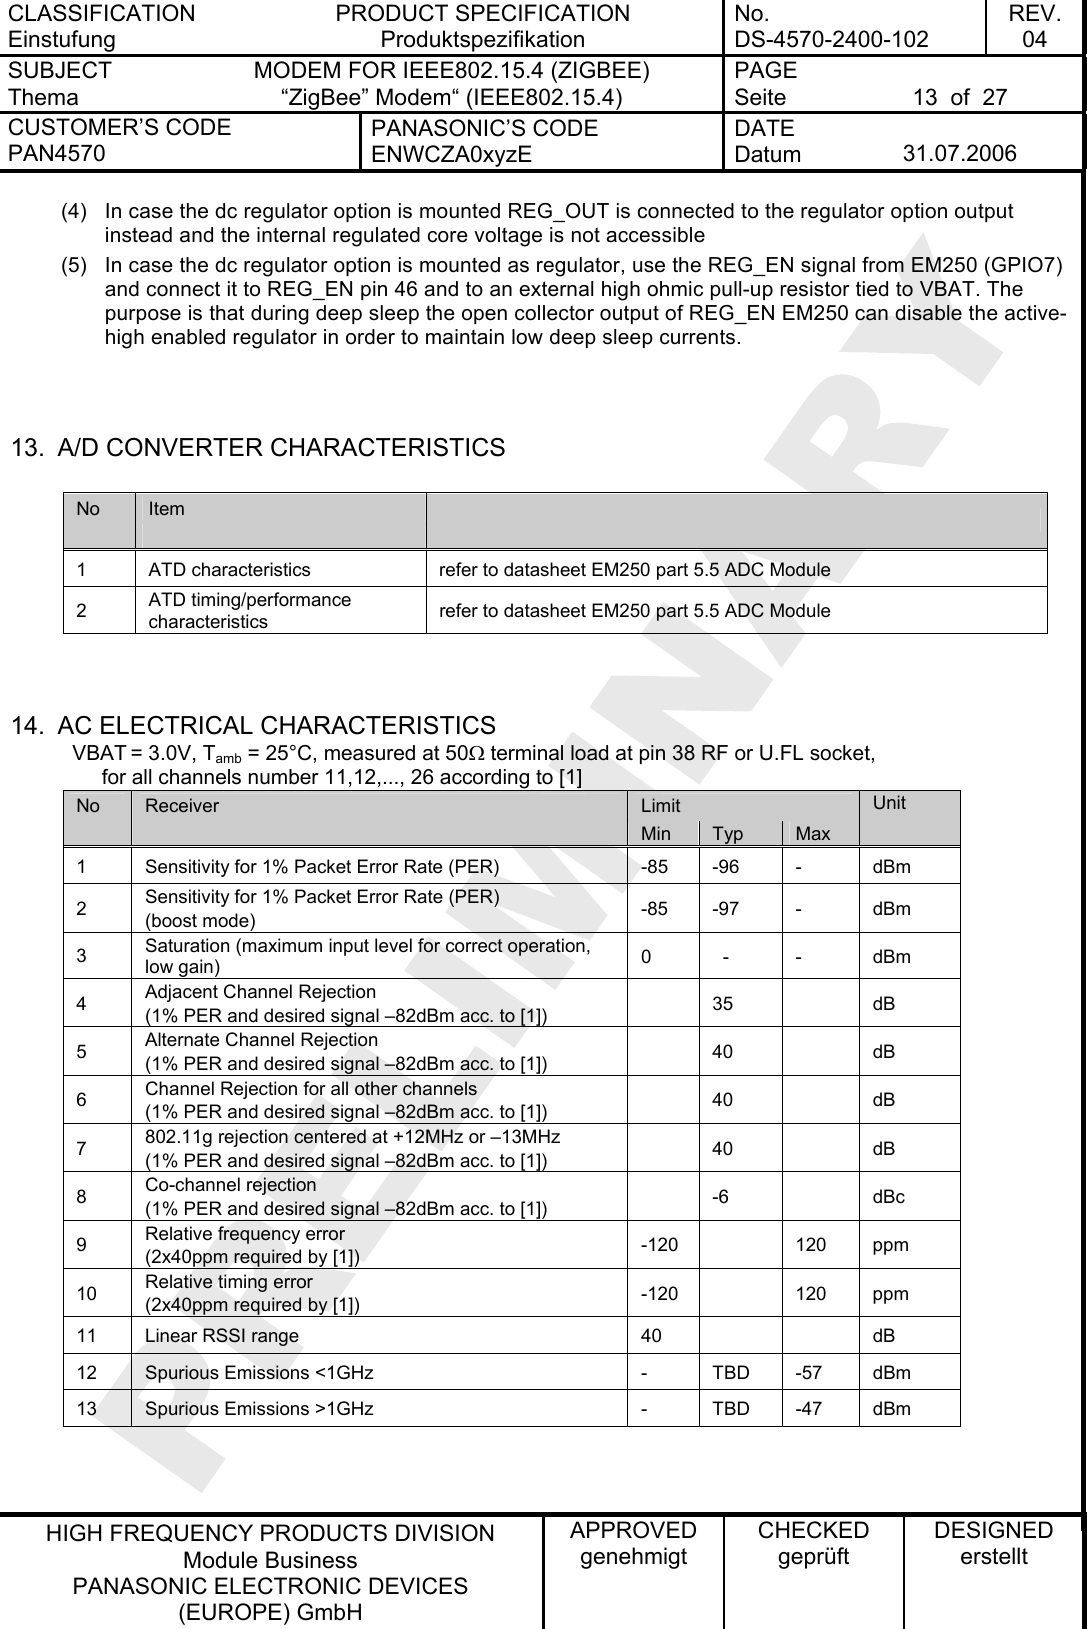 CLASSIFICATION Einstufung PRODUCT SPECIFICATION Produktspezifikation No. DS-4570-2400-102 REV. 04 SUBJECT Thema MODEM FOR IEEE802.15.4 (ZIGBEE) “ZigBee” Modem“ (IEEE802.15.4)   PAGE Seite  13  of  27 CUSTOMER’S CODE PAN4570 PANASONIC’S CODE ENWCZA0xyzE DATE Datum  31.07.2006   HIGH FREQUENCY PRODUCTS DIVISION Module Business PANASONIC ELECTRONIC DEVICES  (EUROPE) GmbH APPROVED genehmigt CHECKED geprüft DESIGNED erstellt (4)  In case the dc regulator option is mounted REG_OUT is connected to the regulator option output instead and the internal regulated core voltage is not accessible  (5)  In case the dc regulator option is mounted as regulator, use the REG_EN signal from EM250 (GPIO7) and connect it to REG_EN pin 46 and to an external high ohmic pull-up resistor tied to VBAT. The purpose is that during deep sleep the open collector output of REG_EN EM250 can disable the active-high enabled regulator in order to maintain low deep sleep currents.   13.  A/D CONVERTER CHARACTERISTICS  No  Item      1  ATD characteristics  refer to datasheet EM250 part 5.5 ADC Module 2  ATD timing/performance characteristics  refer to datasheet EM250 part 5.5 ADC Module   14.  AC ELECTRICAL CHARACTERISTICS  VBAT = 3.0V, Tamb = 25°C, measured at 50Ω terminal load at pin 38 RF or U.FL socket,  for all channels number 11,12,..., 26 according to [1] No  Limit  Unit  Receiver  Min  Typ  Max   1  Sensitivity for 1% Packet Error Rate (PER)  -85  -96  -  dBm 2  Sensitivity for 1% Packet Error Rate (PER) (boost mode)  -85 -97  -  dBm 3  Saturation (maximum input level for correct operation, low gain)  0    -  -  dBm 4  Adjacent Channel Rejection  (1% PER and desired signal –82dBm acc. to [1])   35   dB 5  Alternate Channel Rejection  (1% PER and desired signal –82dBm acc. to [1])   40   dB 6  Channel Rejection for all other channels (1% PER and desired signal –82dBm acc. to [1])   40   dB 7  802.11g rejection centered at +12MHz or –13MHz (1% PER and desired signal –82dBm acc. to [1])   40   dB 8  Co-channel rejection (1% PER and desired signal –82dBm acc. to [1])   -6   dBc 9  Relative frequency error (2x40ppm required by [1])  -120   120  ppm 10  Relative timing error (2x40ppm required by [1])  -120   120  ppm 11  Linear RSSI range  40      dB 12  Spurious Emissions &lt;1GHz  -  TBD  -57  dBm 13  Spurious Emissions &gt;1GHz  -  TBD  -47  dBm   